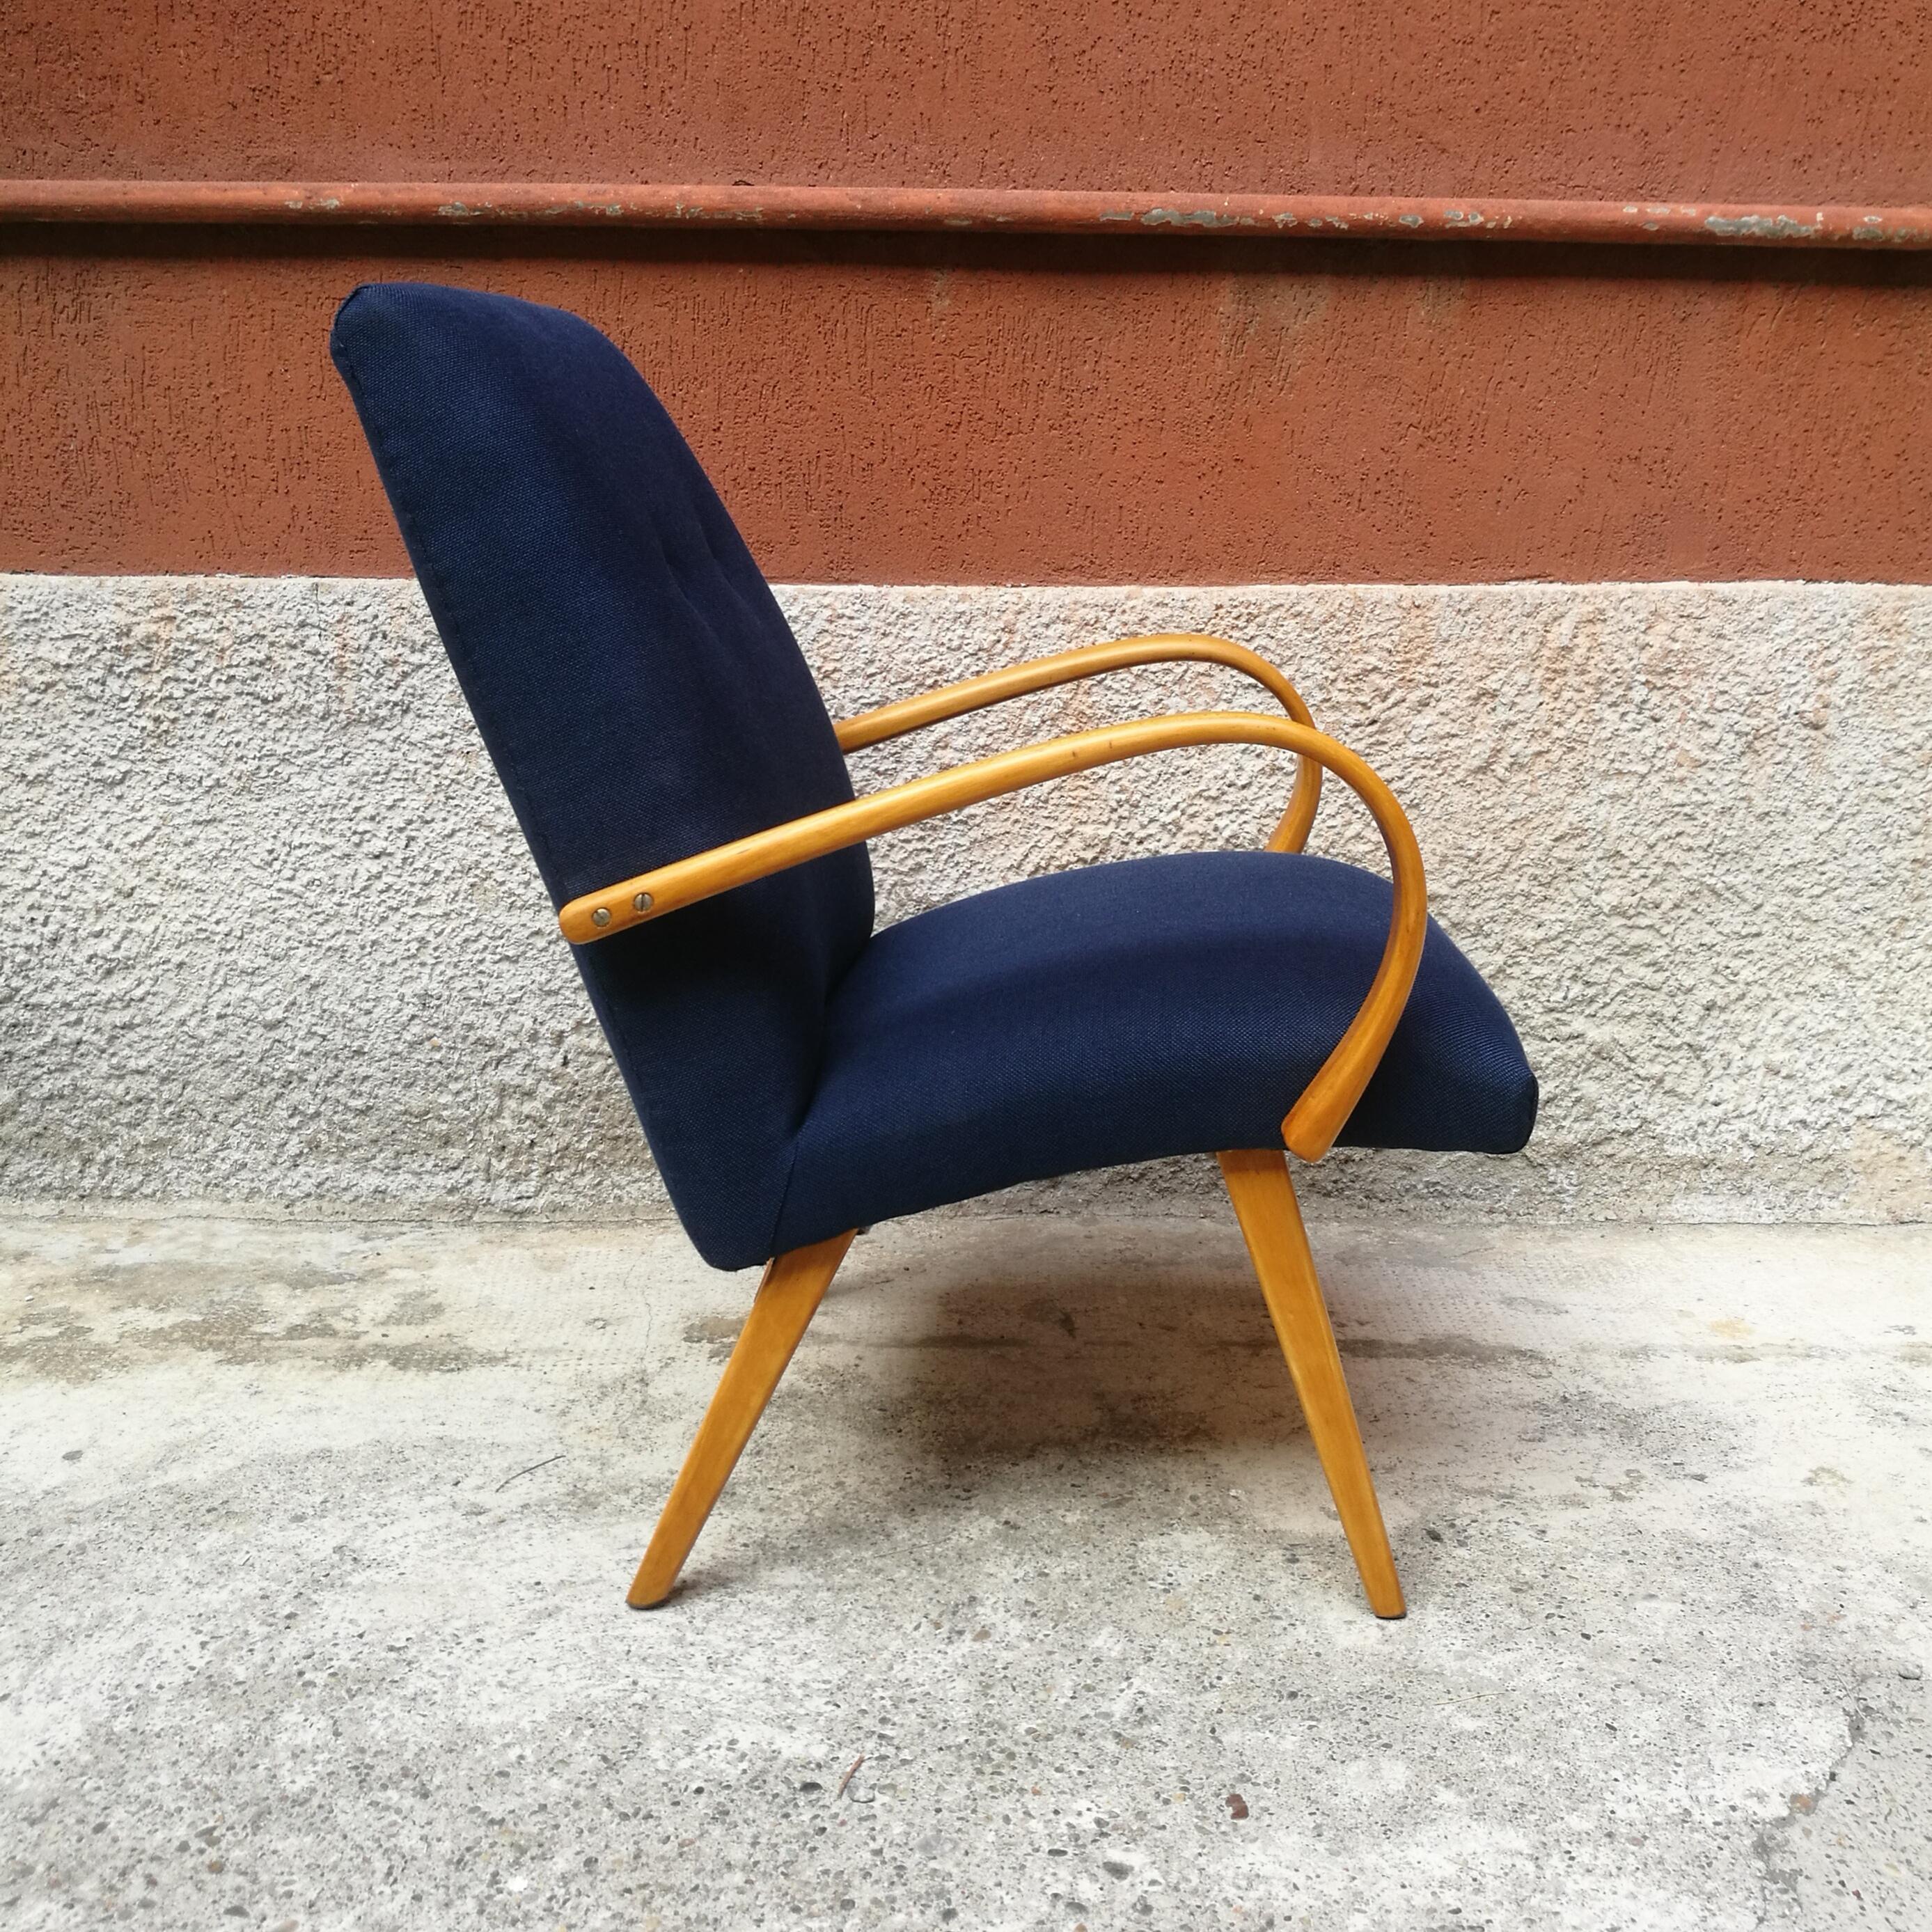 Danish beech and blue cotton, restored armchair, 1960s
Armchair with armrests covered in blue jeans cotton with beech structure
Fully restored, perfect conditions.